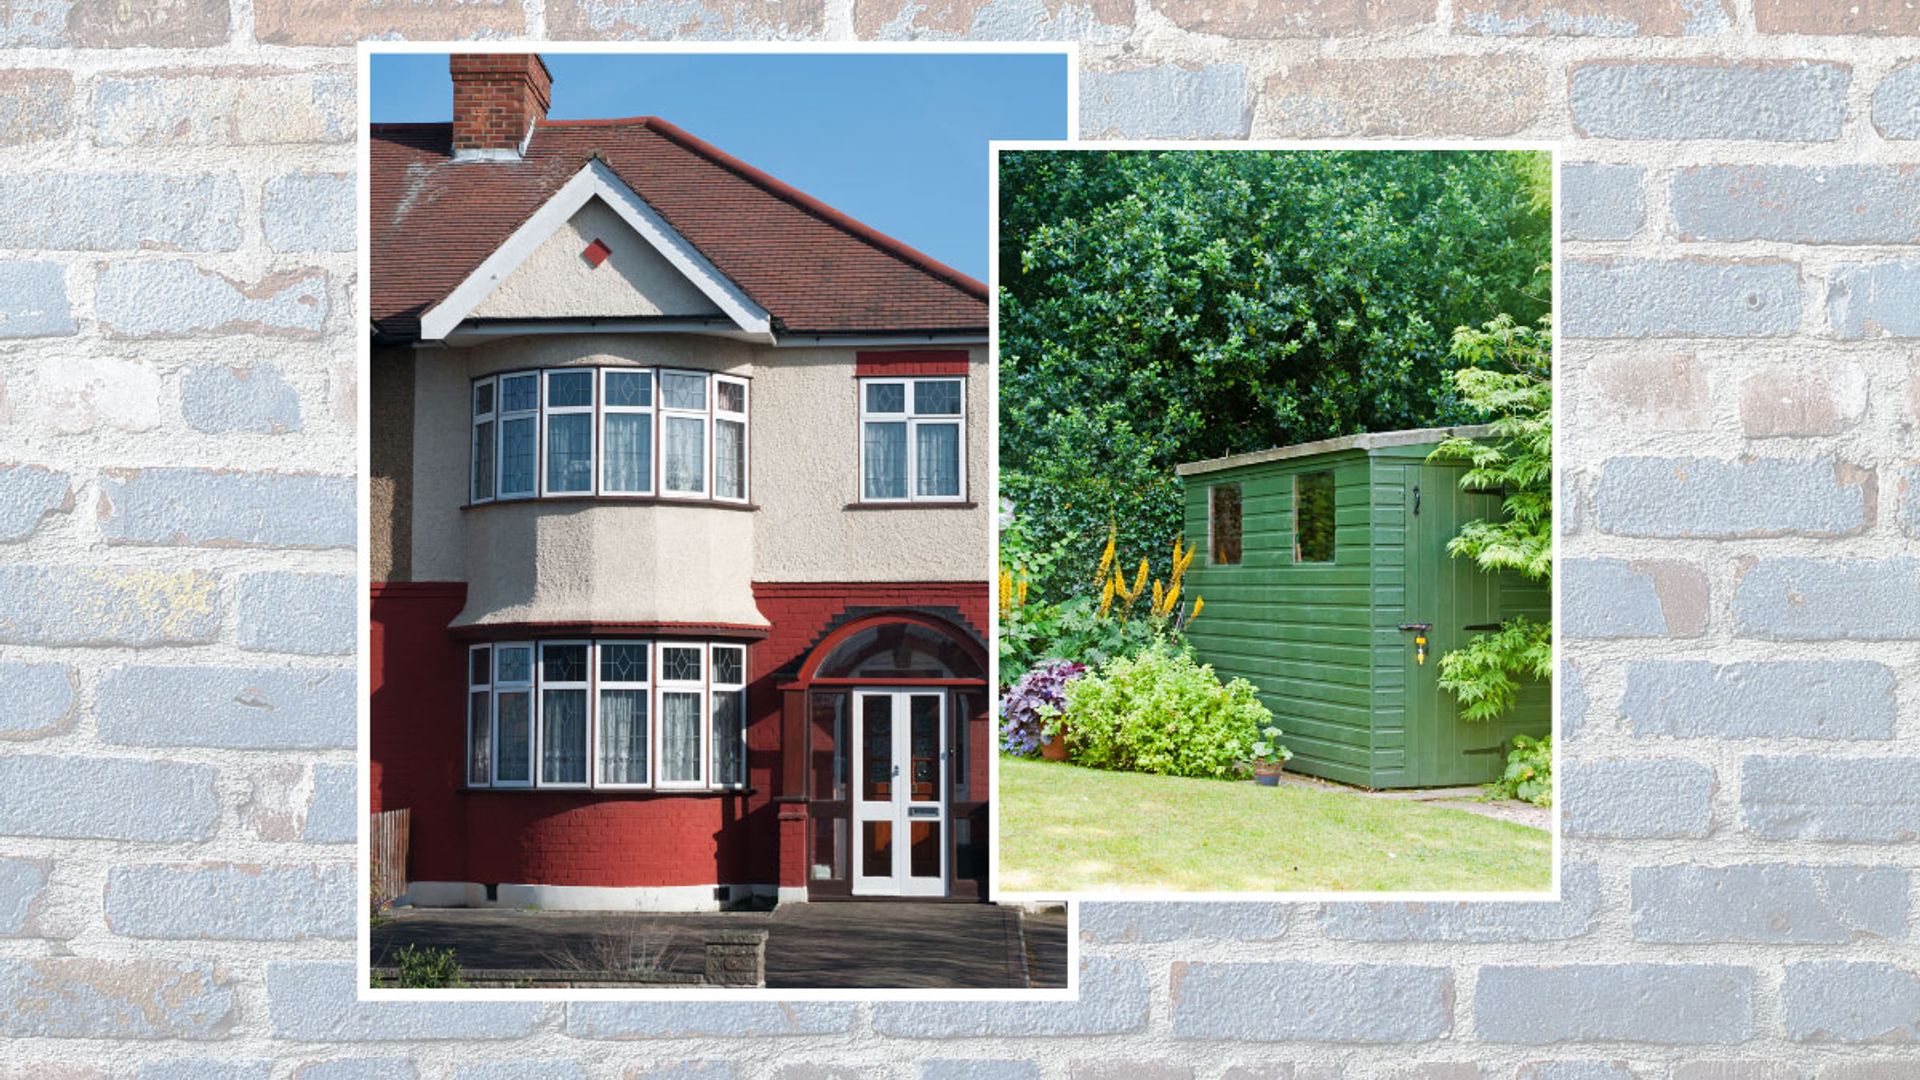 How to add £15k to your home's value in 24 hours